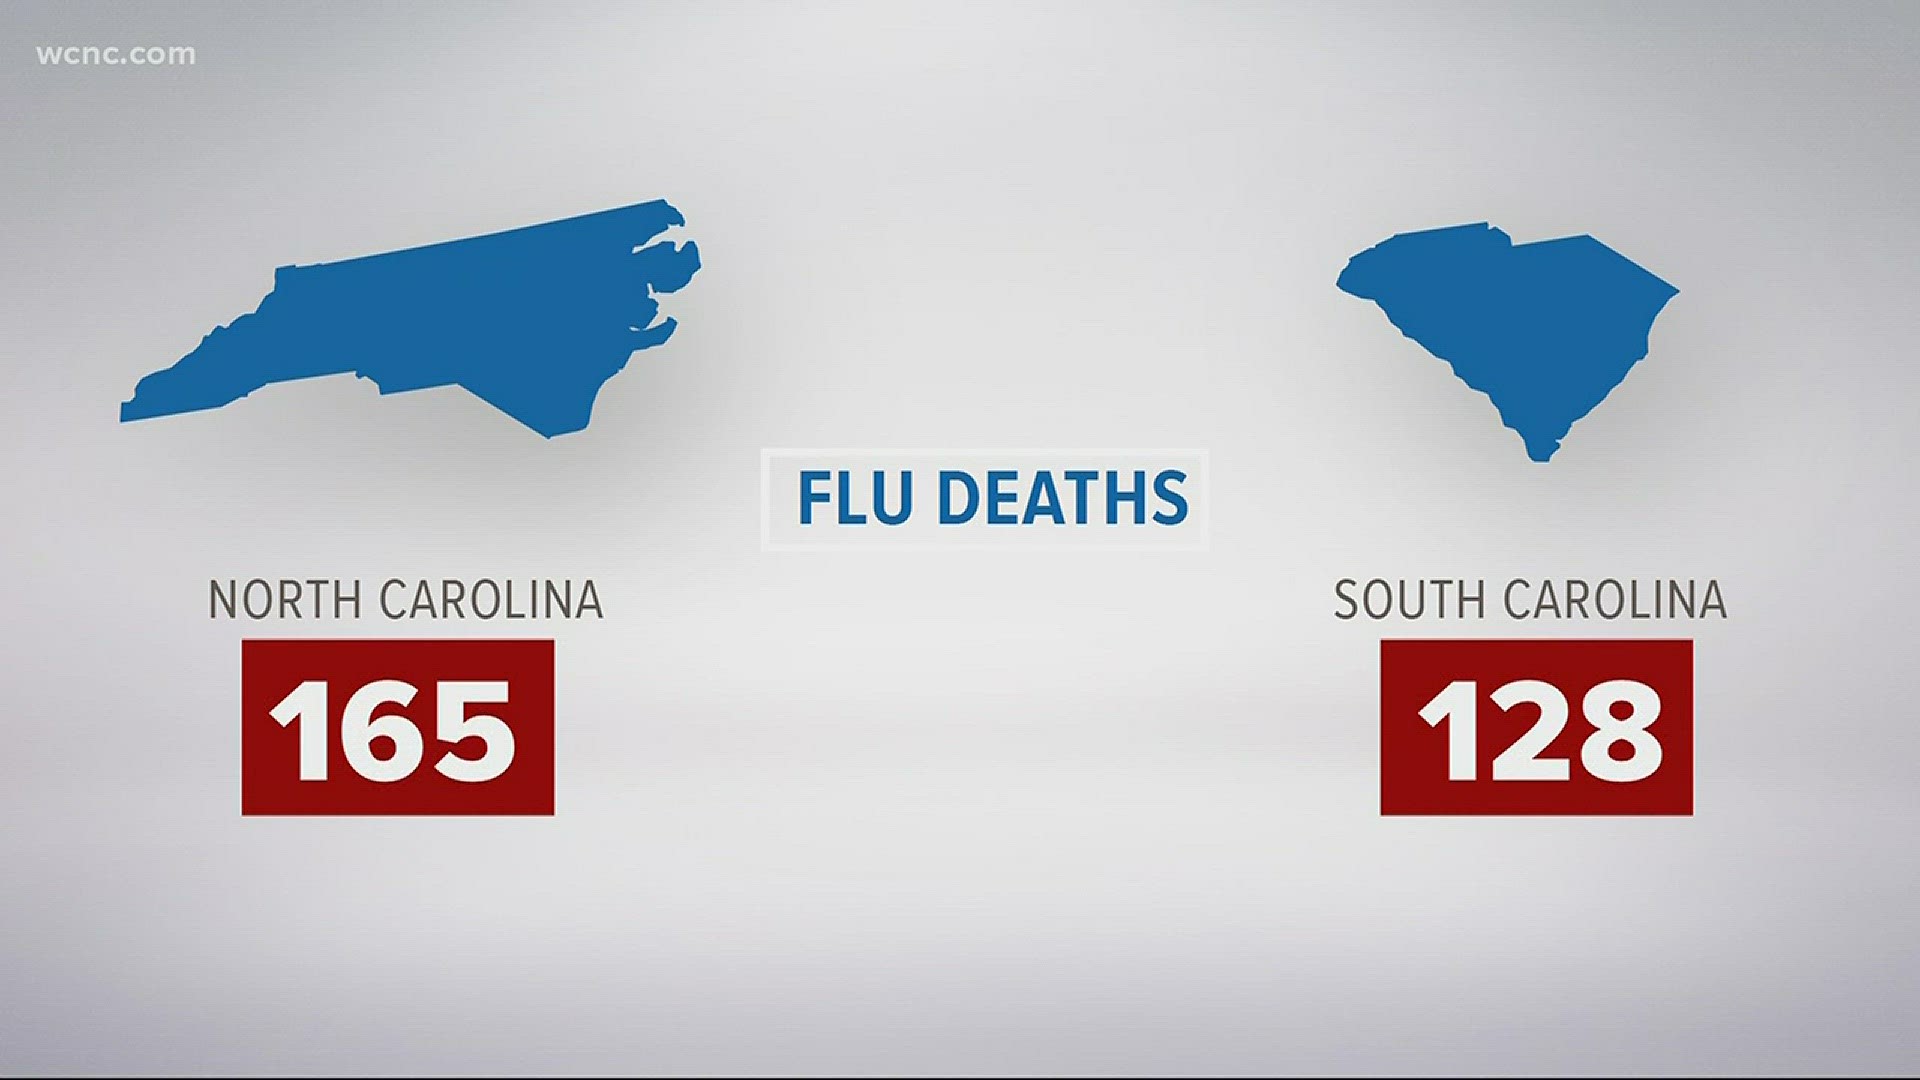 So far this year, NC has reported 165 flu deaths and SC has reported 128